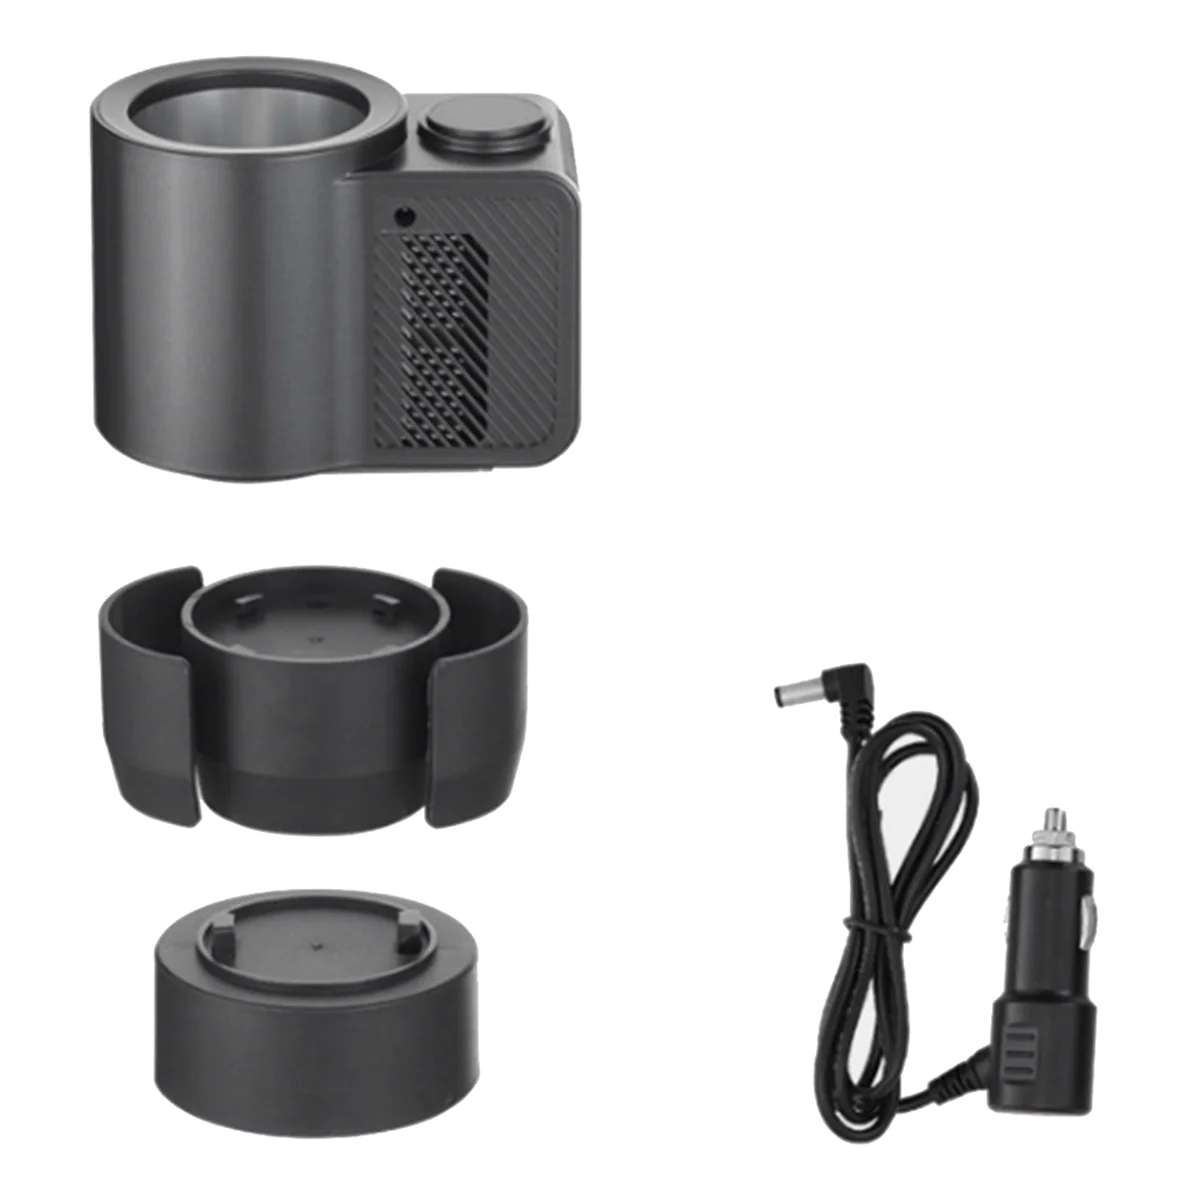 

12V Car Smart 2-In-1 Heating Cooling Cup Intelligent Beverage Holder Cooling Heating Cup with Temperature